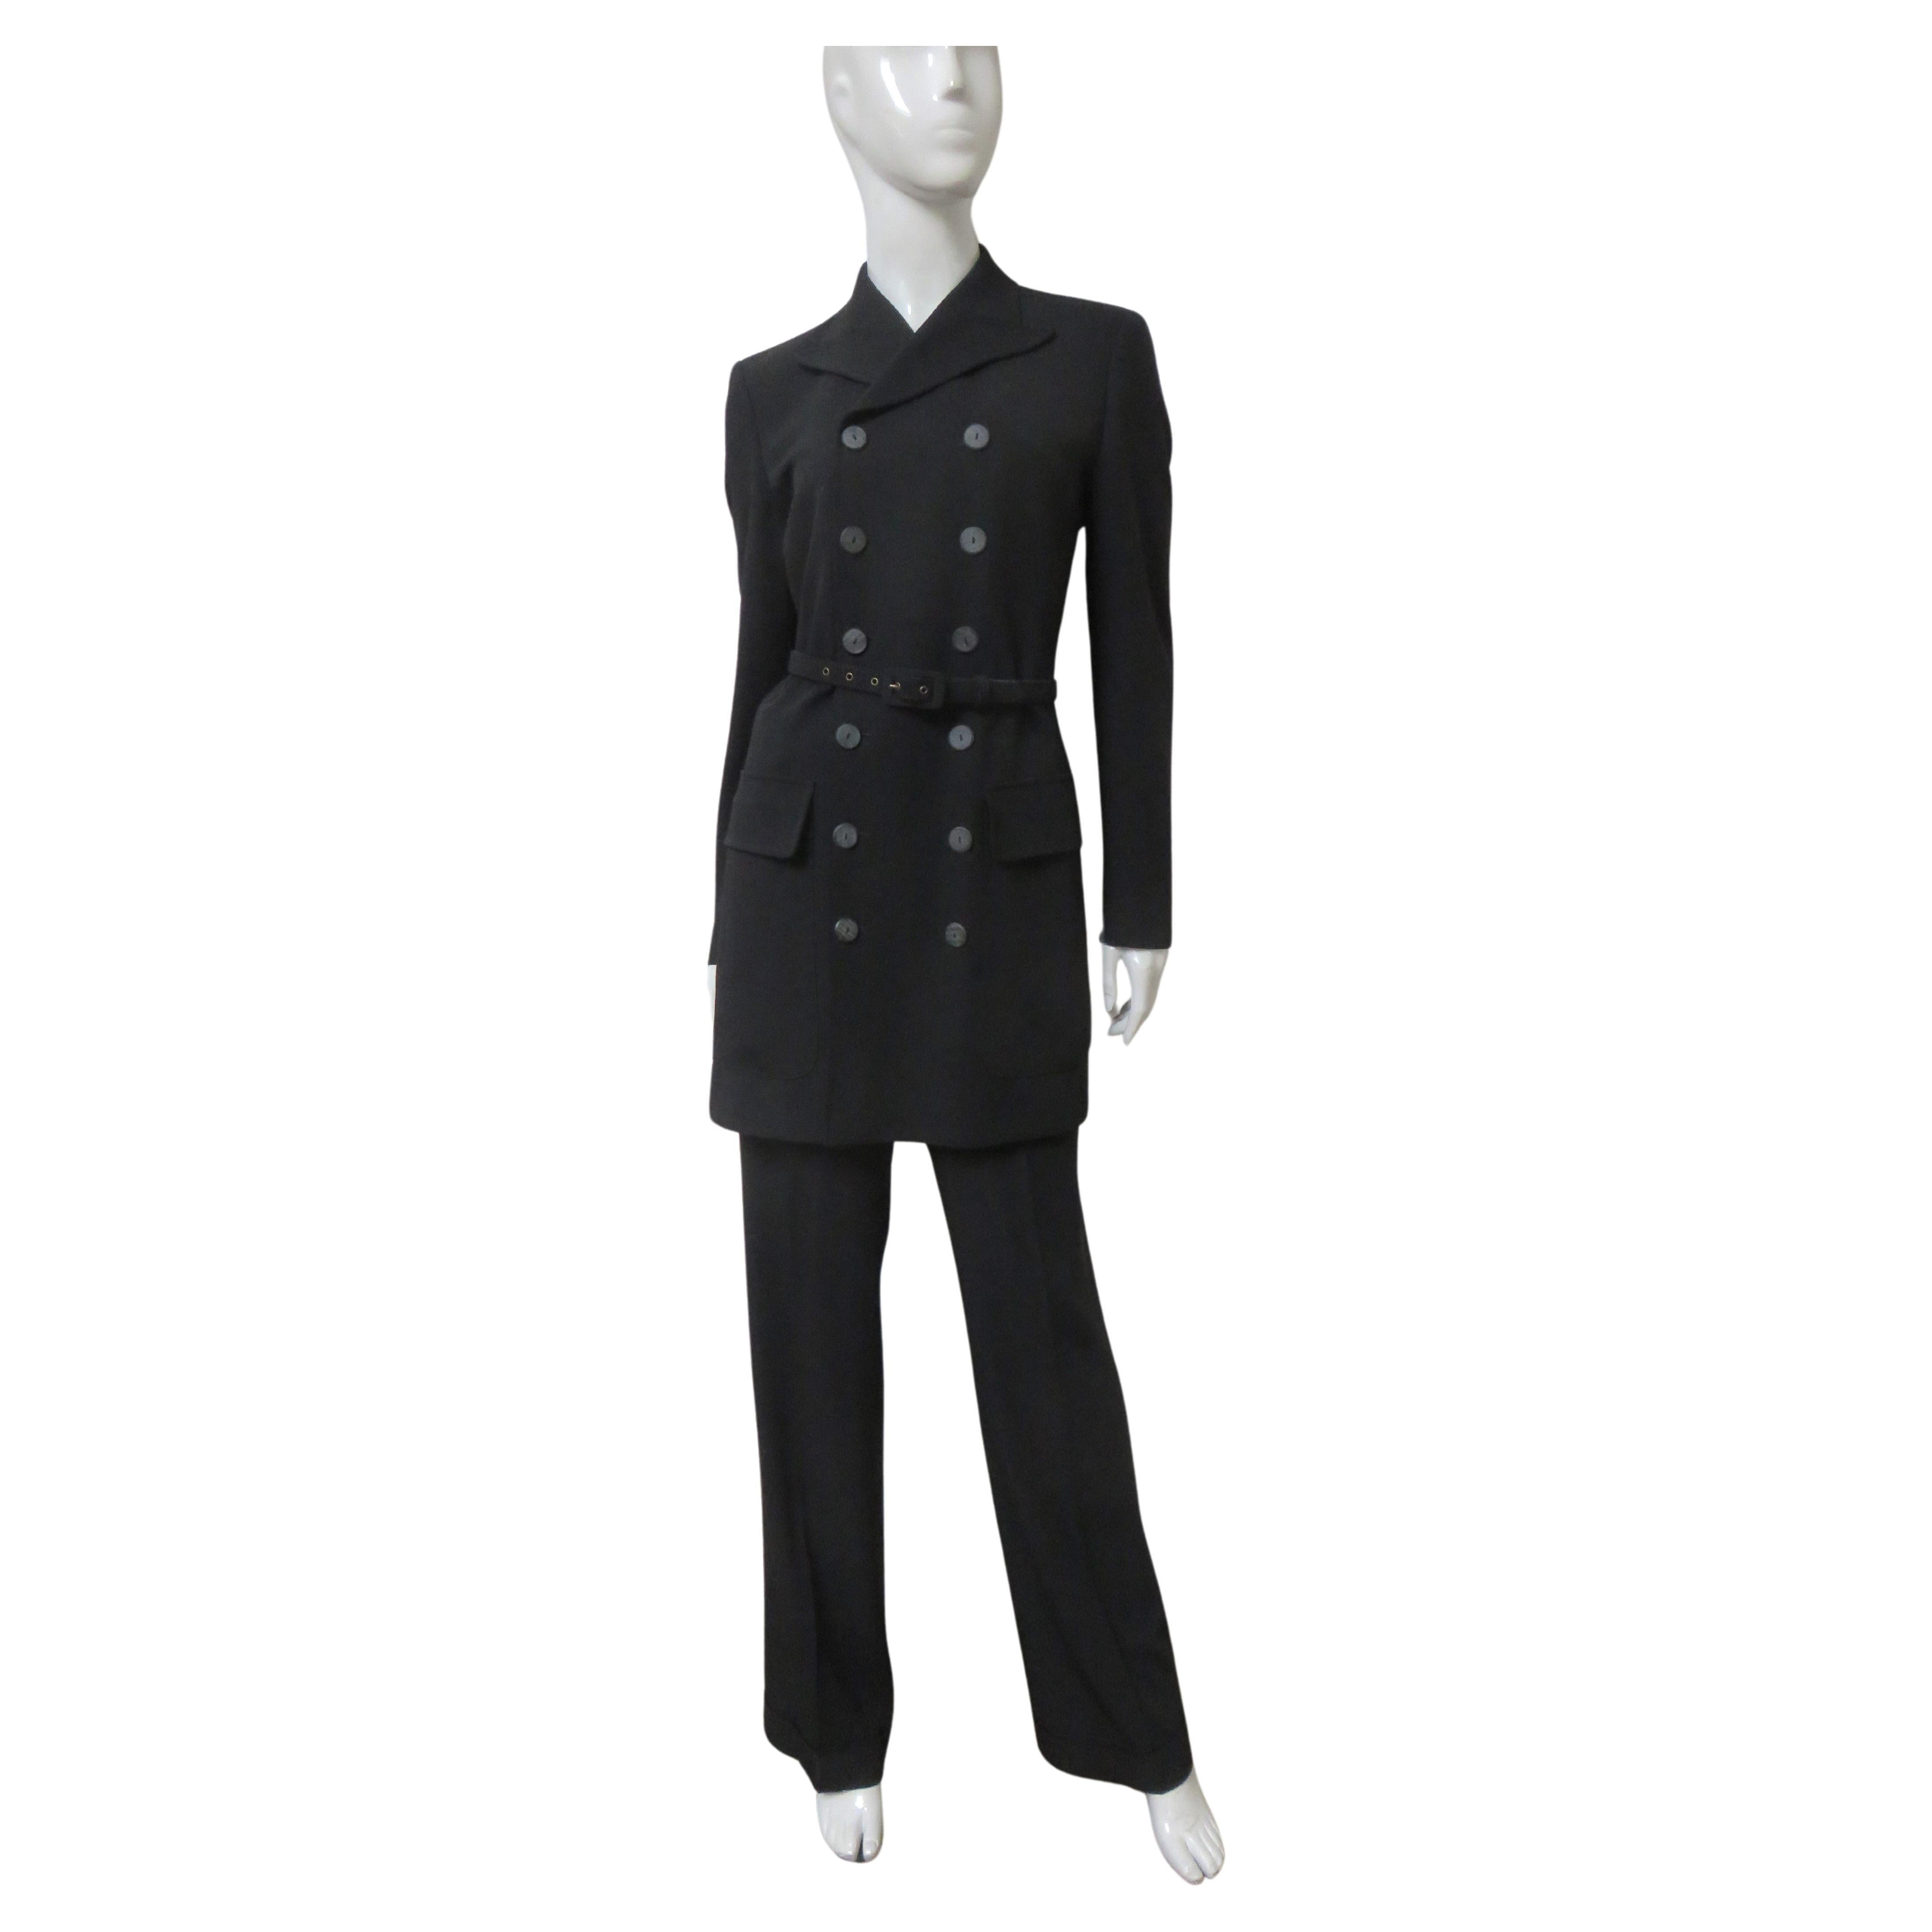 A fabulous black light weight wool with a bit of stretch pant suit from Jean Paul Gaultier.  It has an incredible long double breasted jacket with a lapel collar, flap pockets, buttons at the cuffs and a matching belt. The cuffed straight leg pants